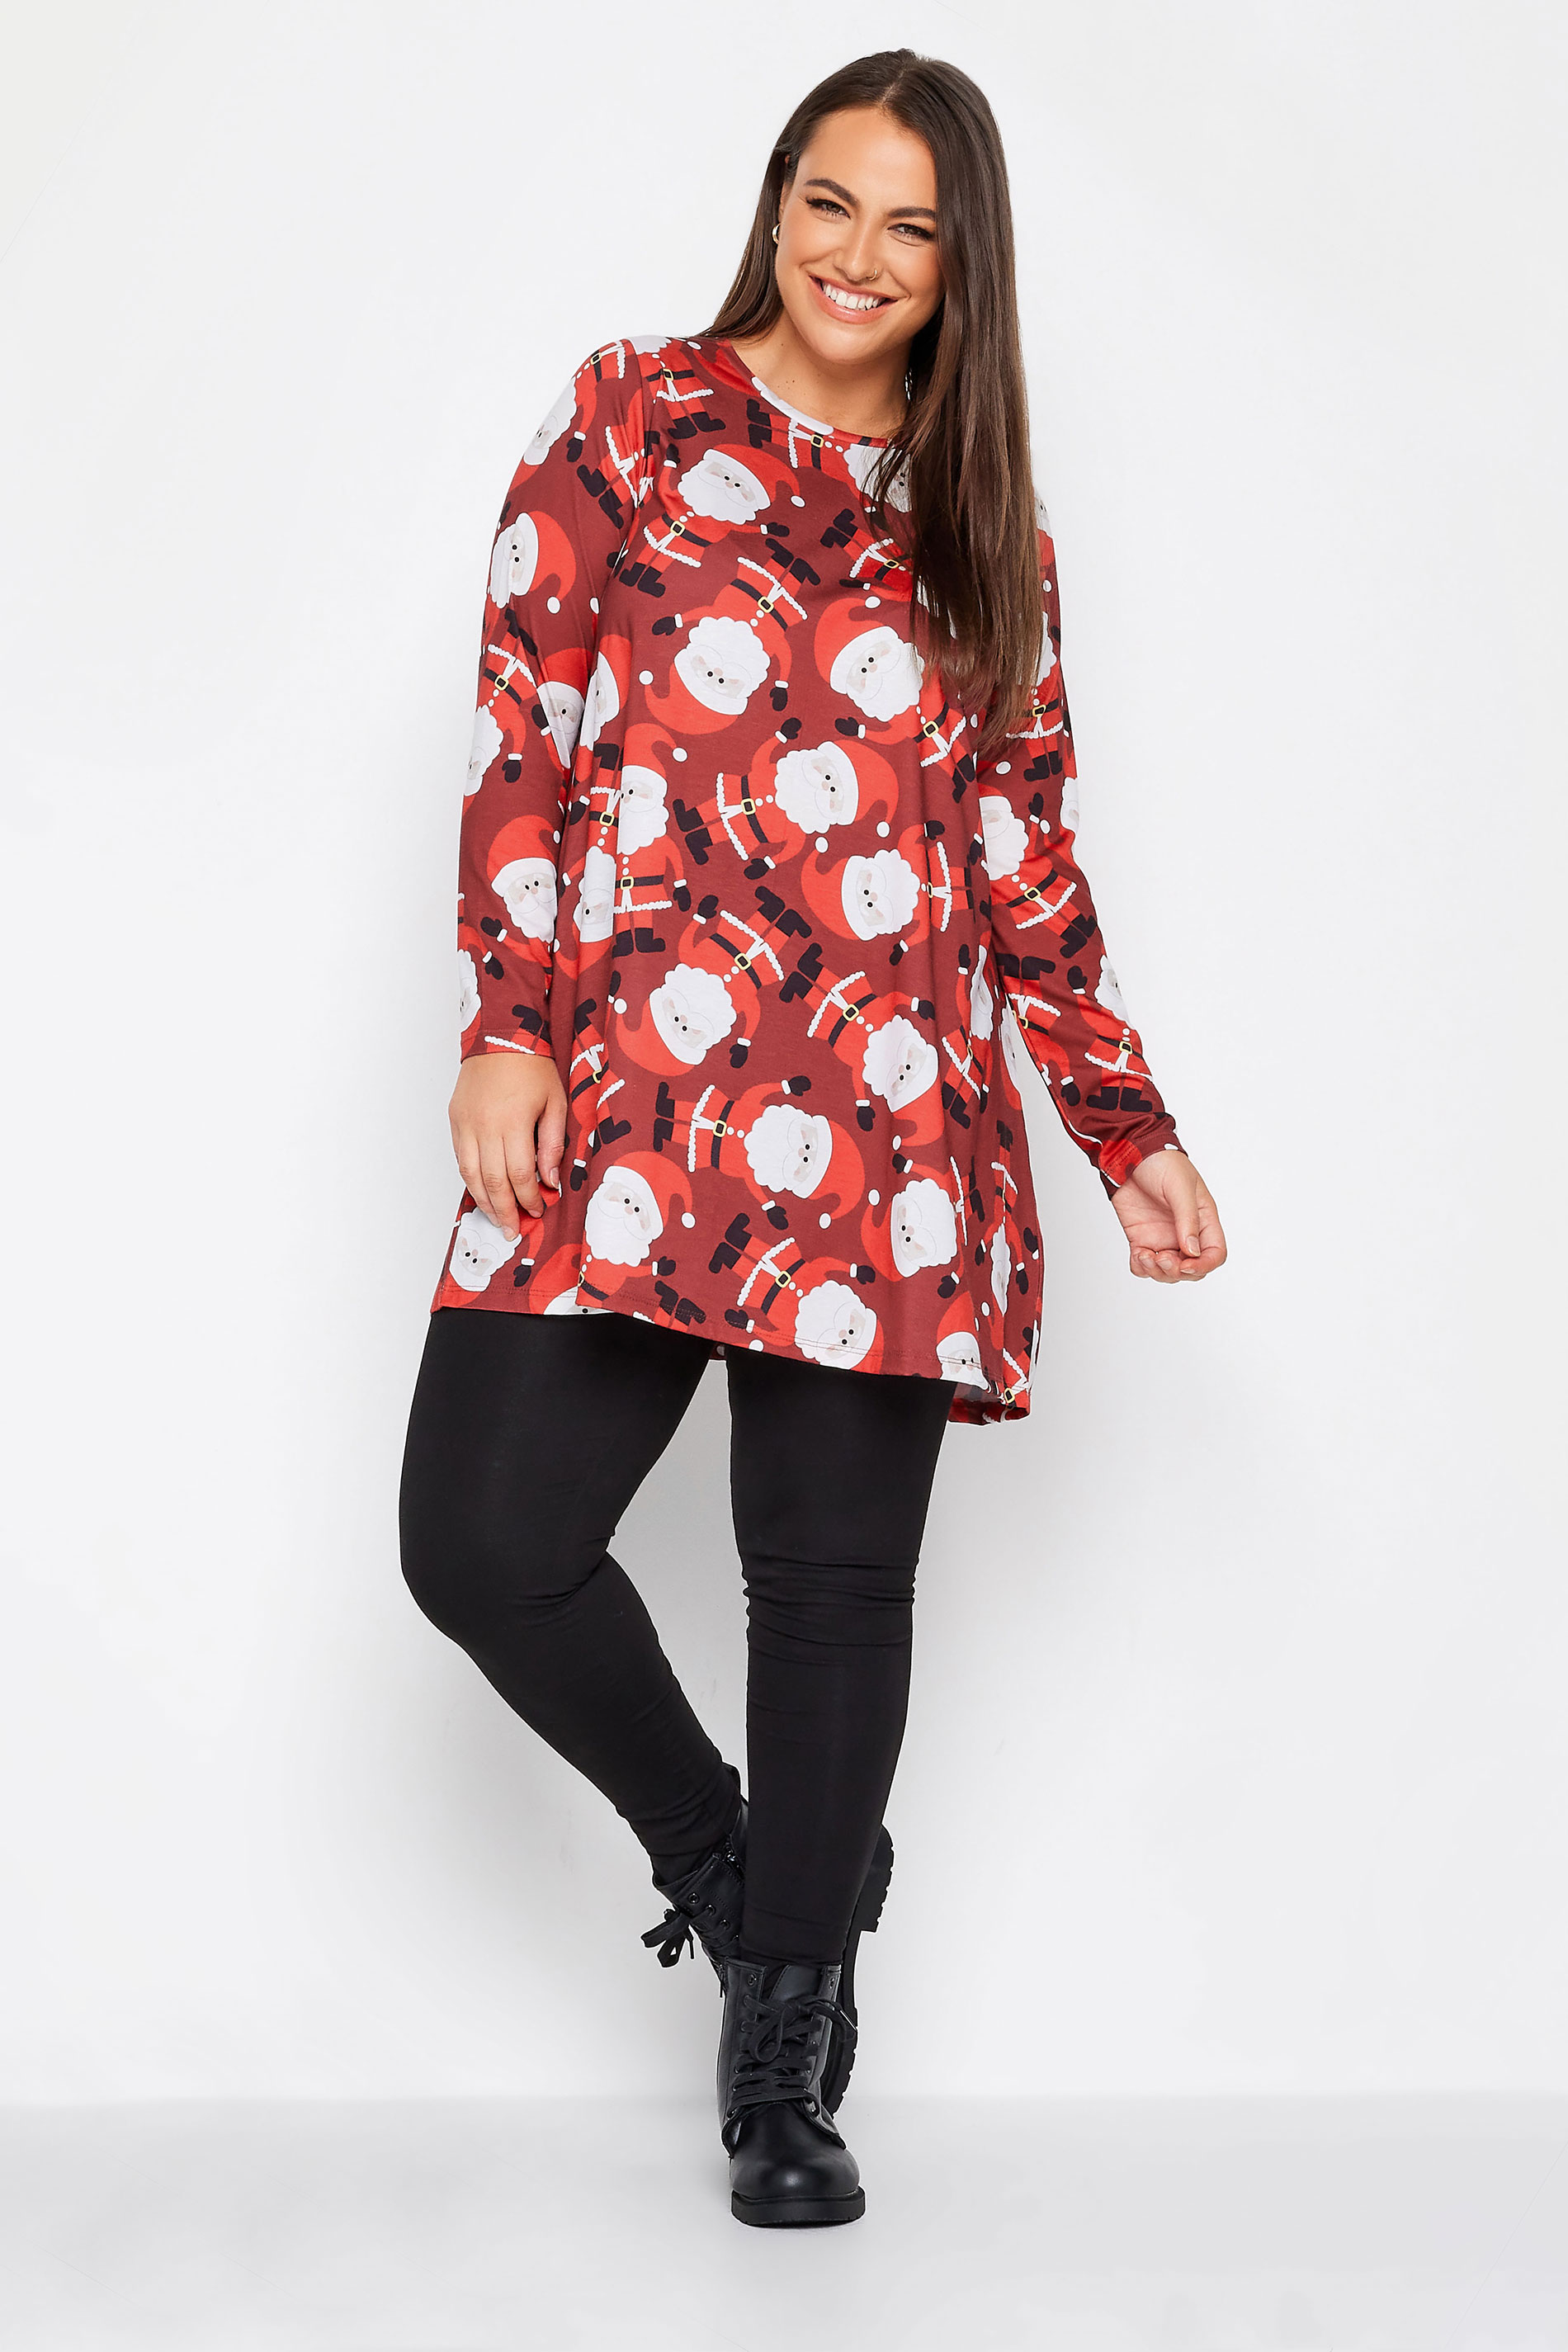 YOURS Plus Size Red Santa Print Christmas Tunic Top | Yours Clothing 2